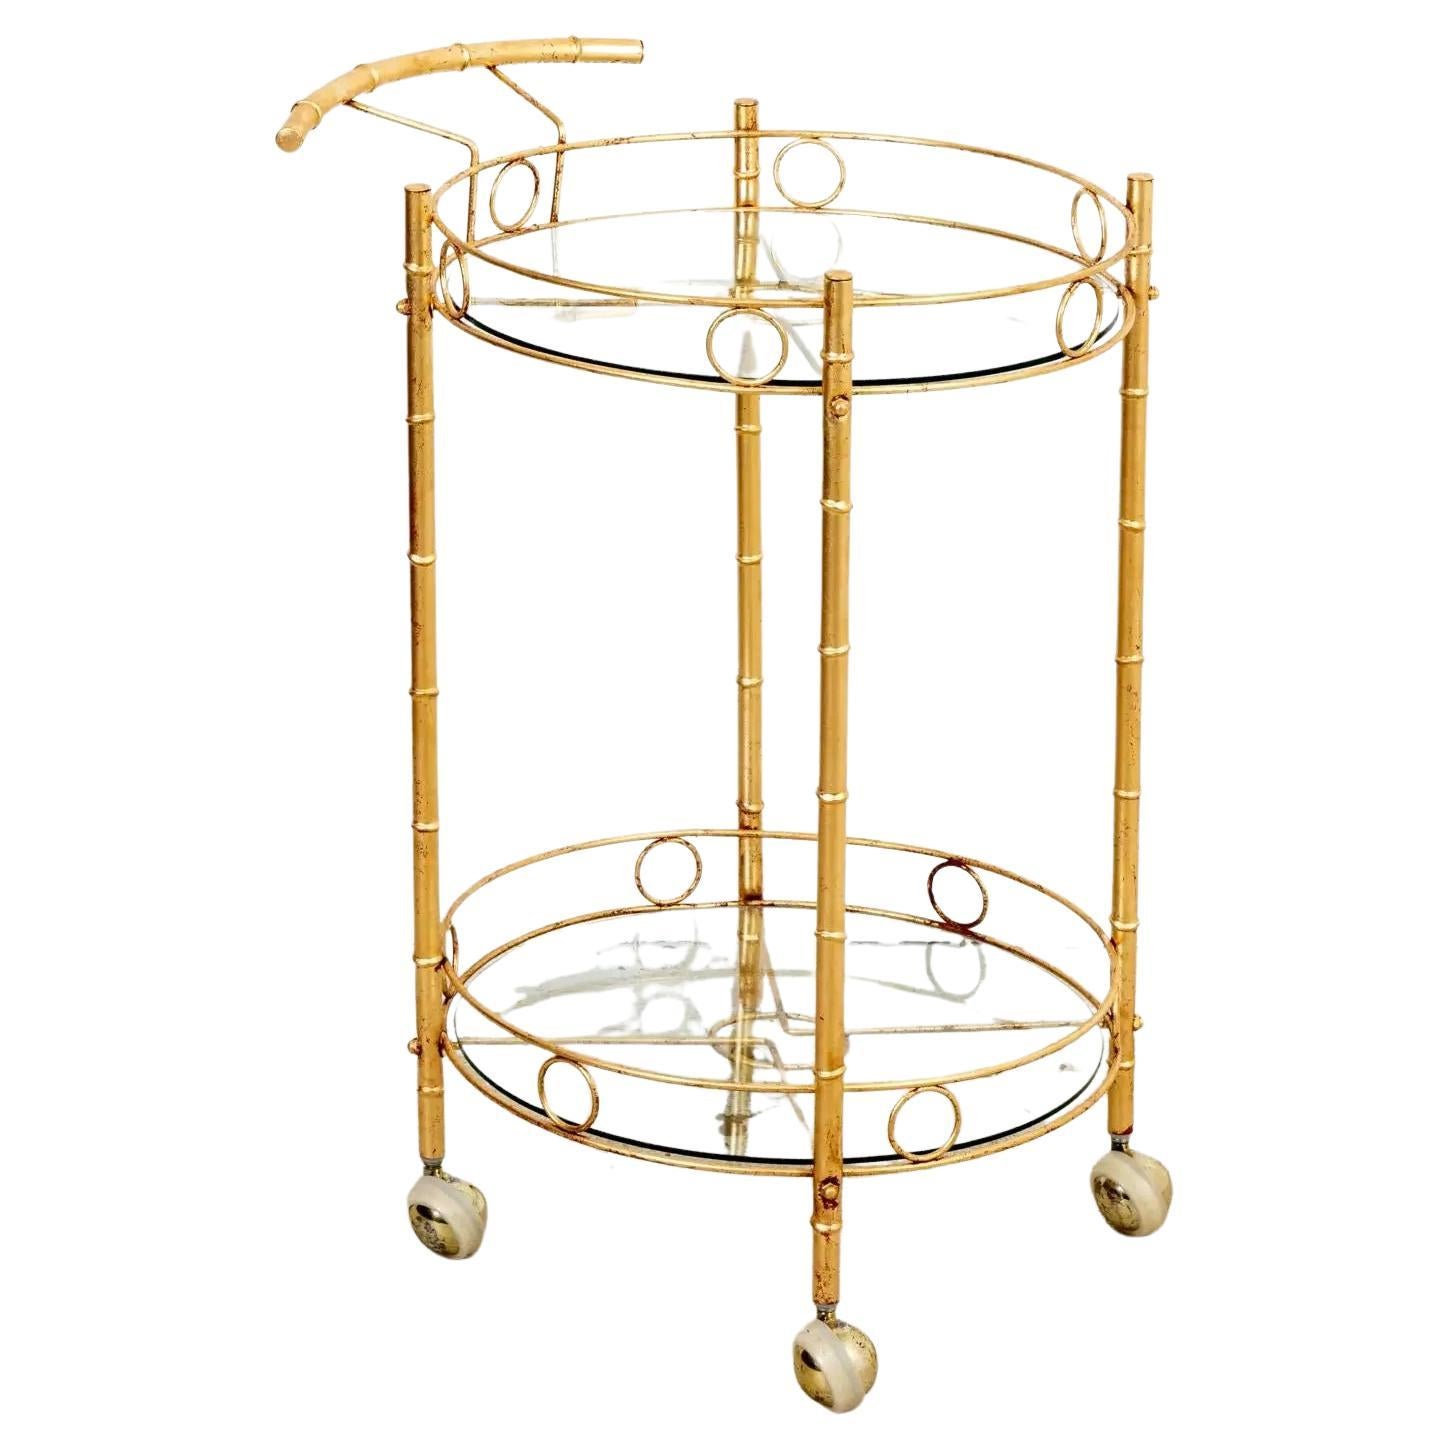 Circa 1960-1970s Hollywood Regency faux bamboo gilt metal round bar cart on ball shaped casters. The drink cart also features two tiers with round glass inserts and disk trim gallery. Made in the United States. Please note of wear consistent with